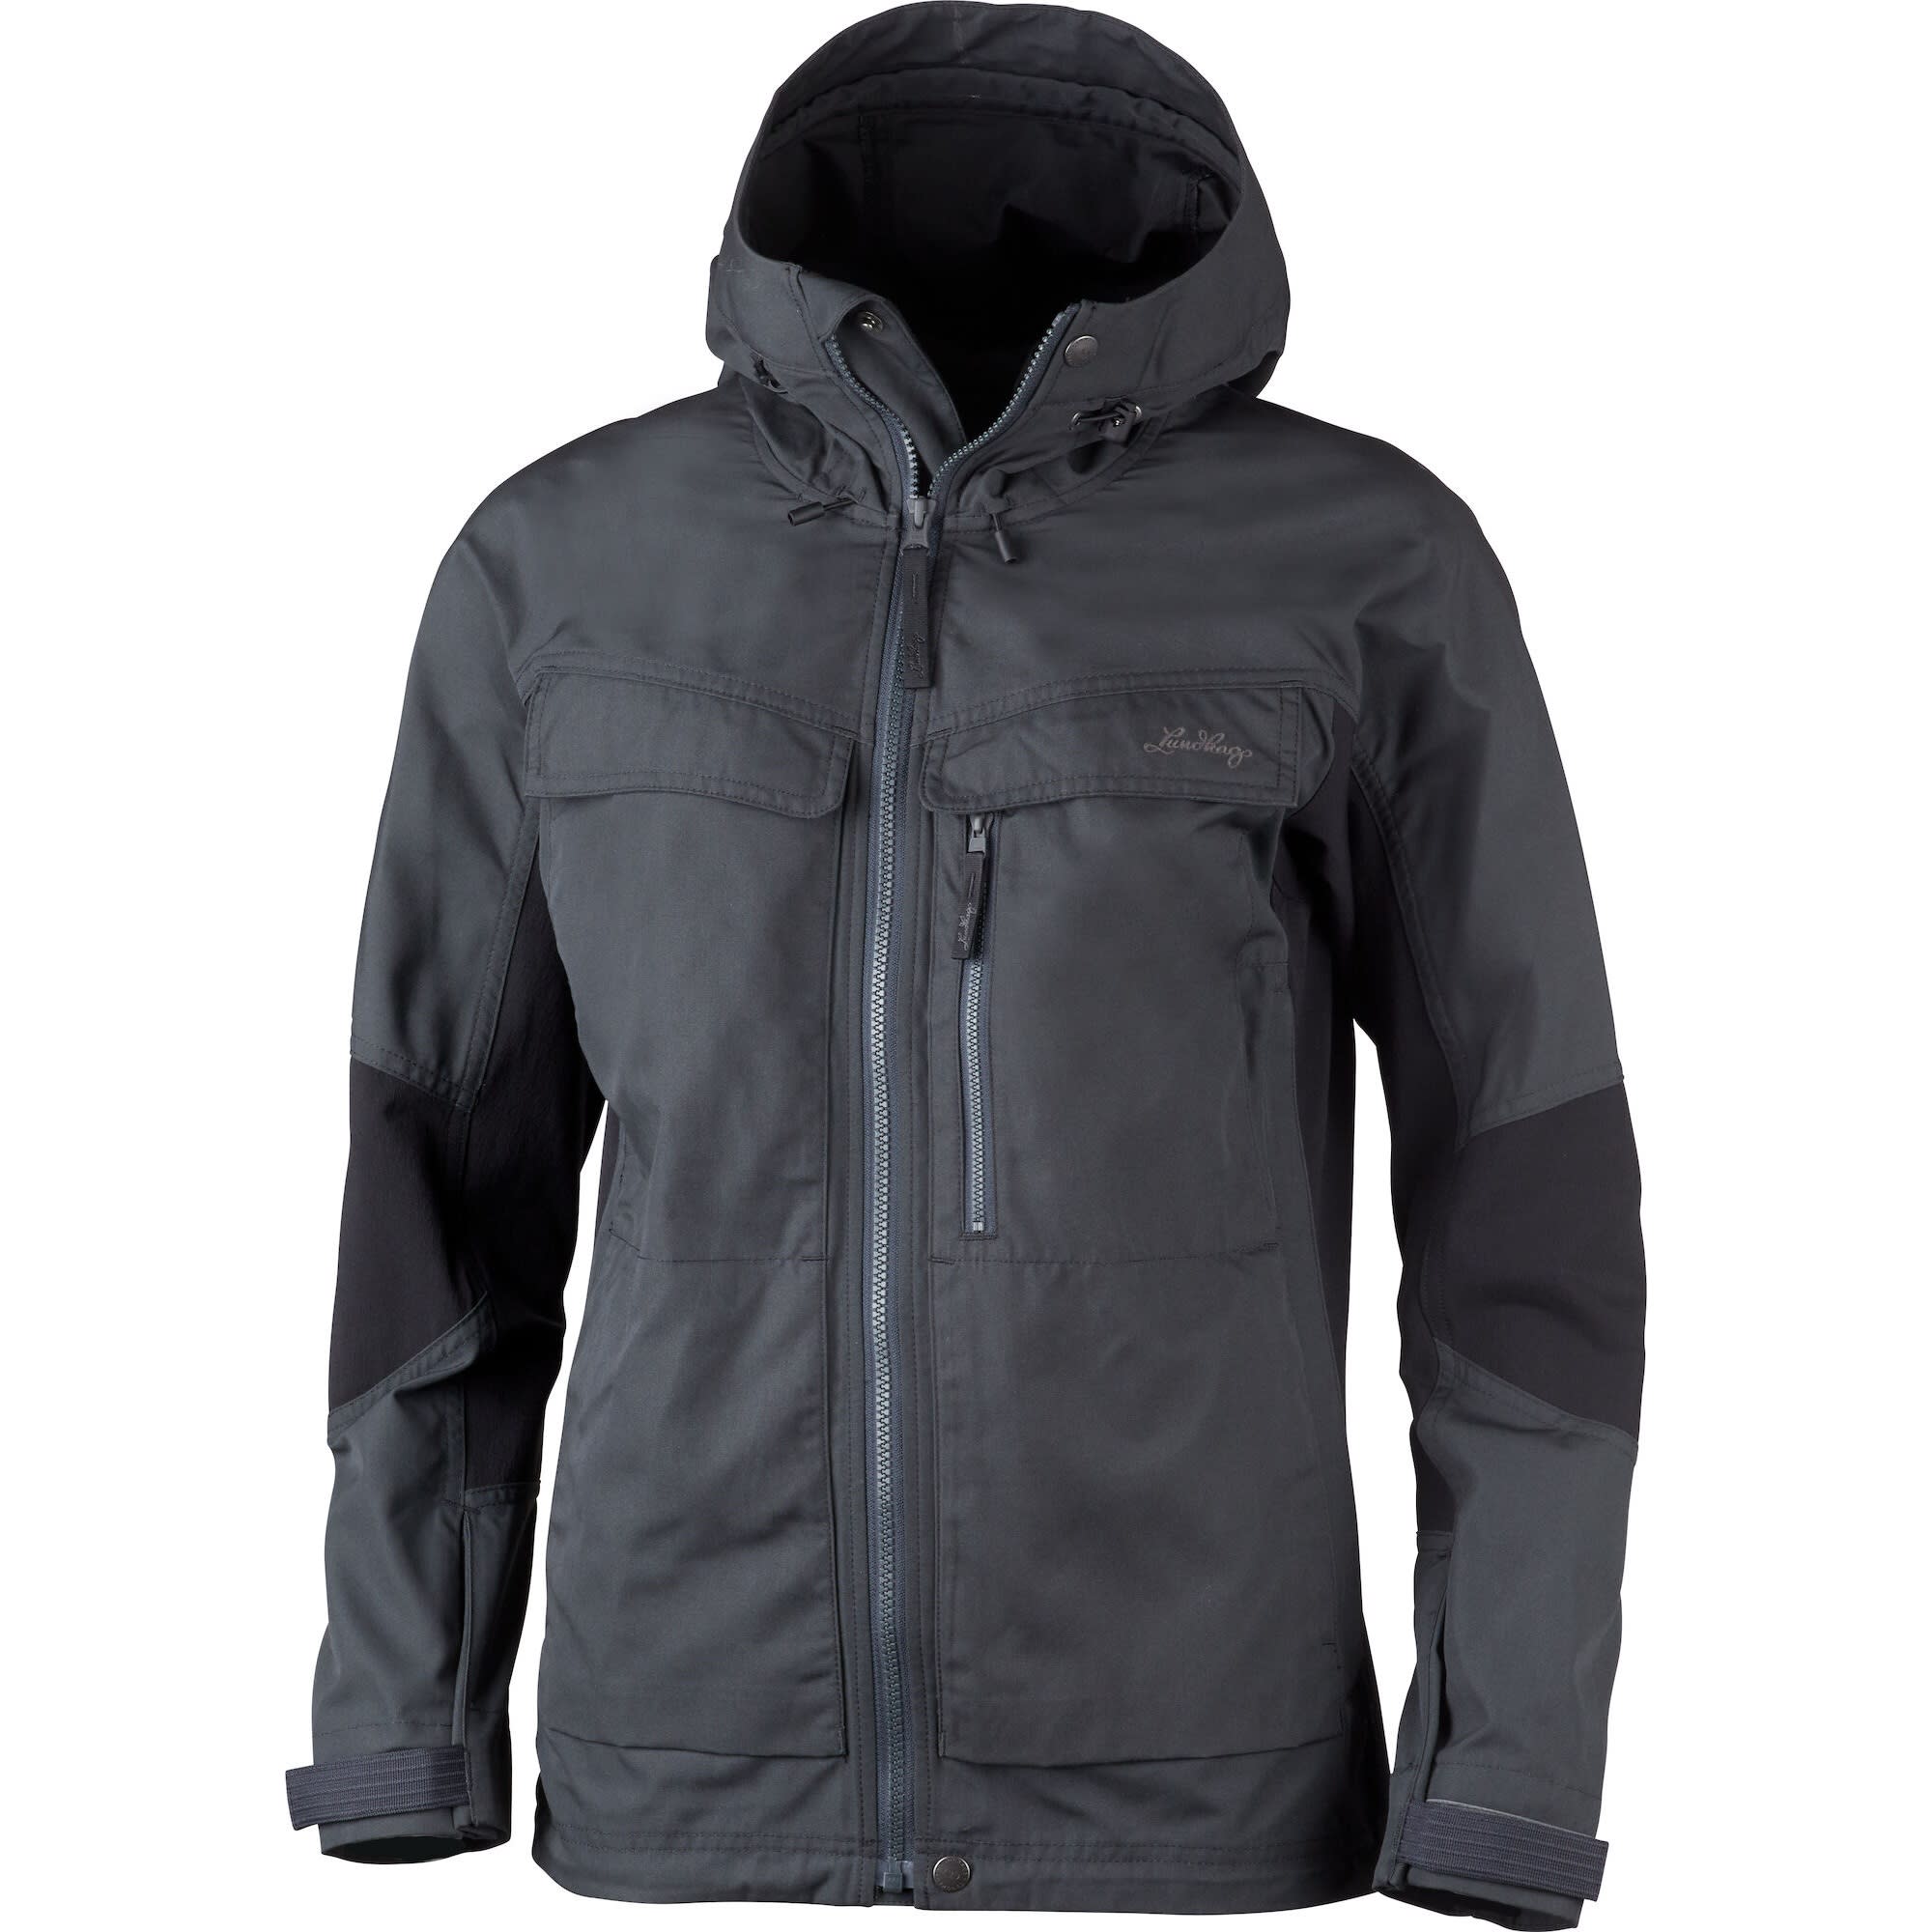 Lundhags Women’s Authentic Jacket Charcoal/Black